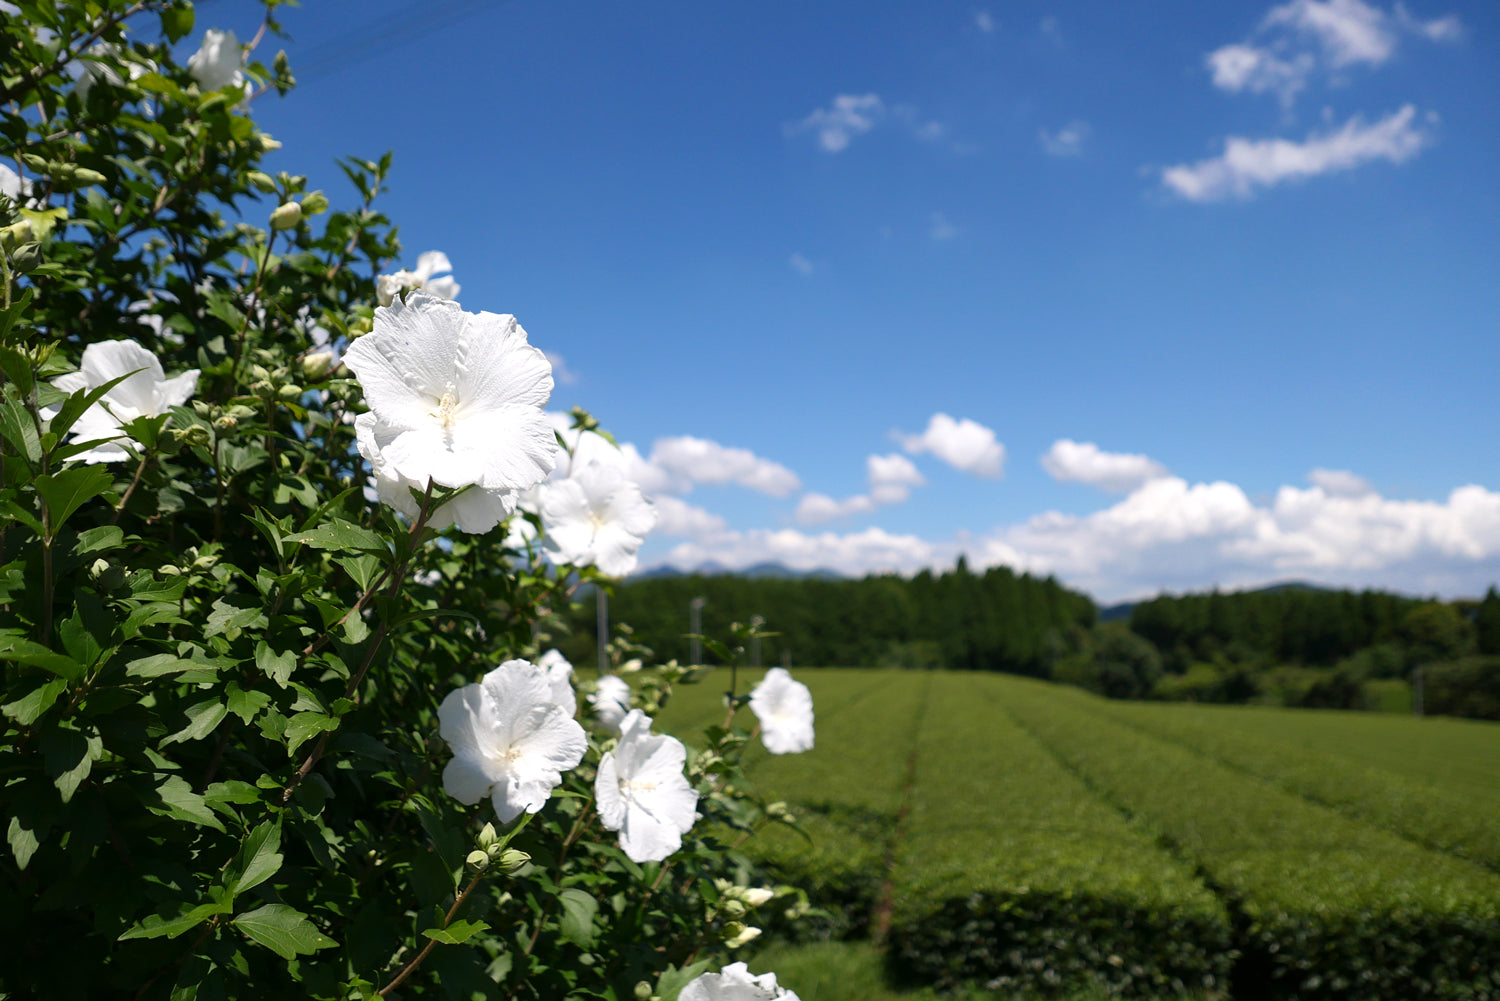 White flowers frame a view of neat, bright-green rows of tea plants.